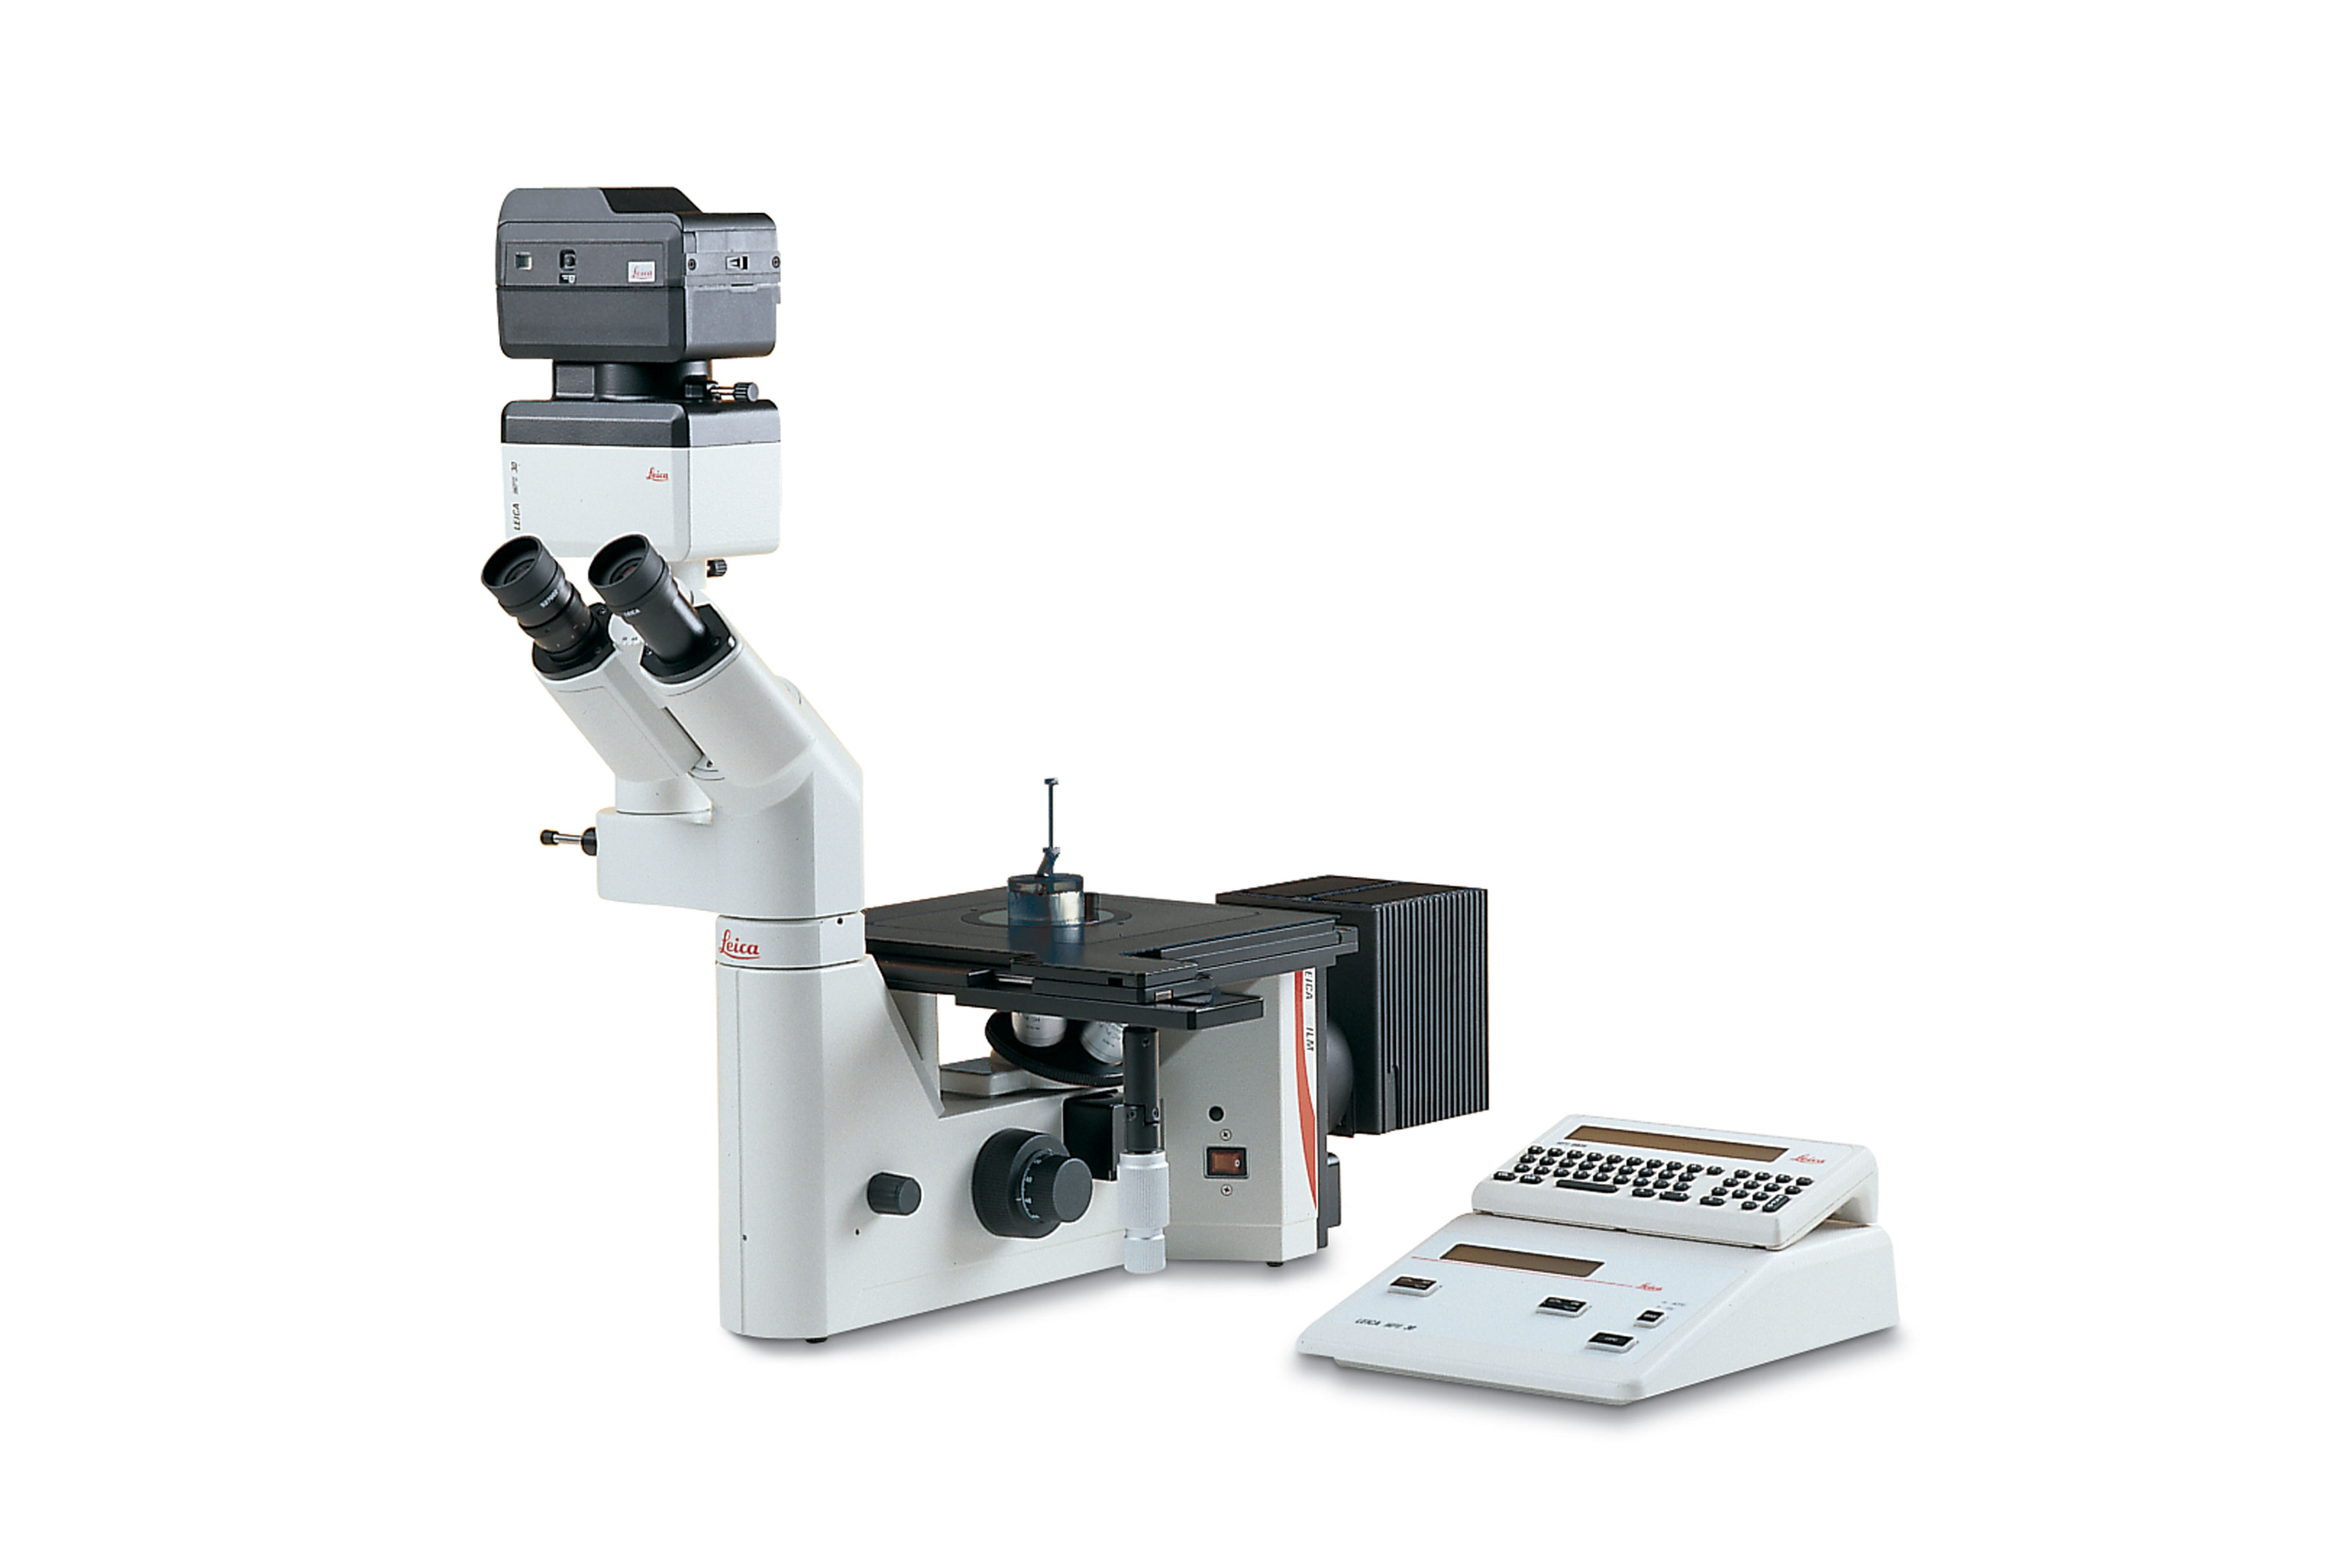 Materials research and industrial quality control are easy with the Leica DM ILM.